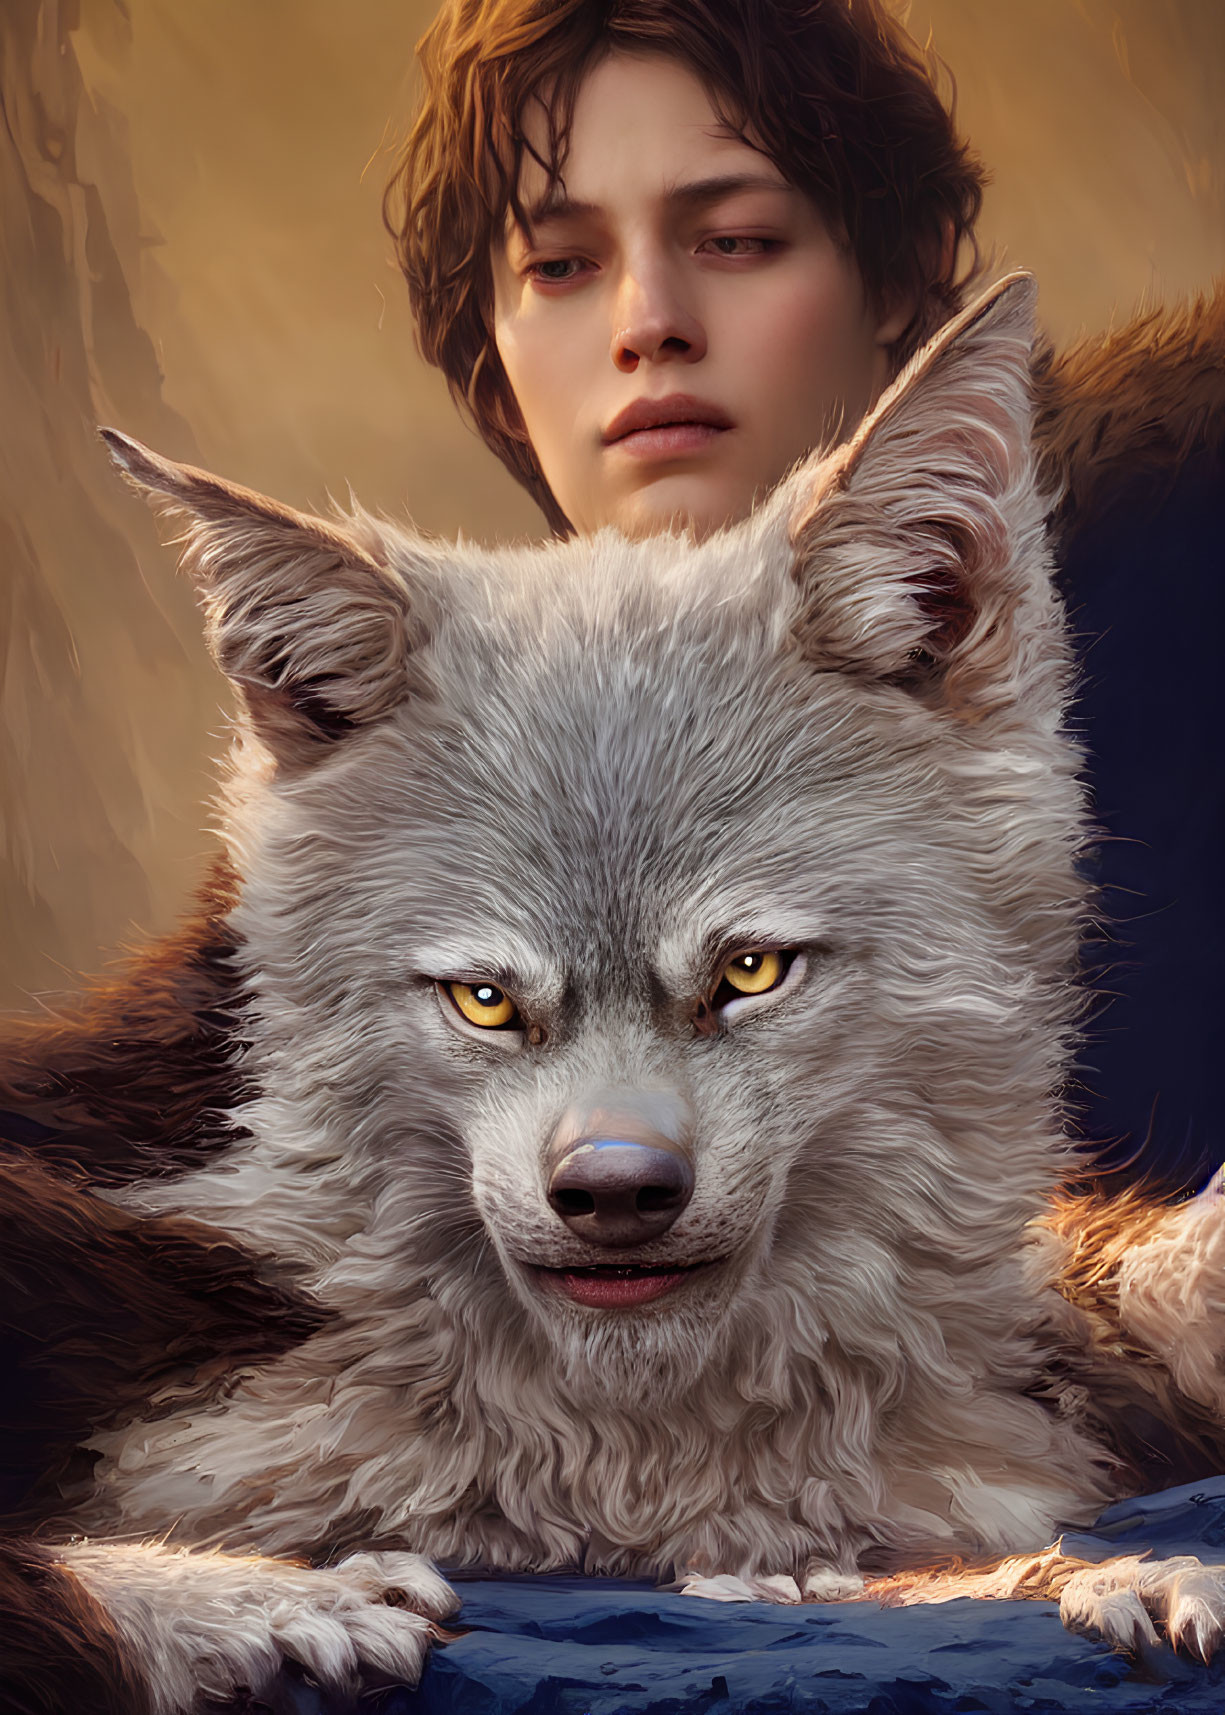 Person and large wolf in close contact against warm backdrop